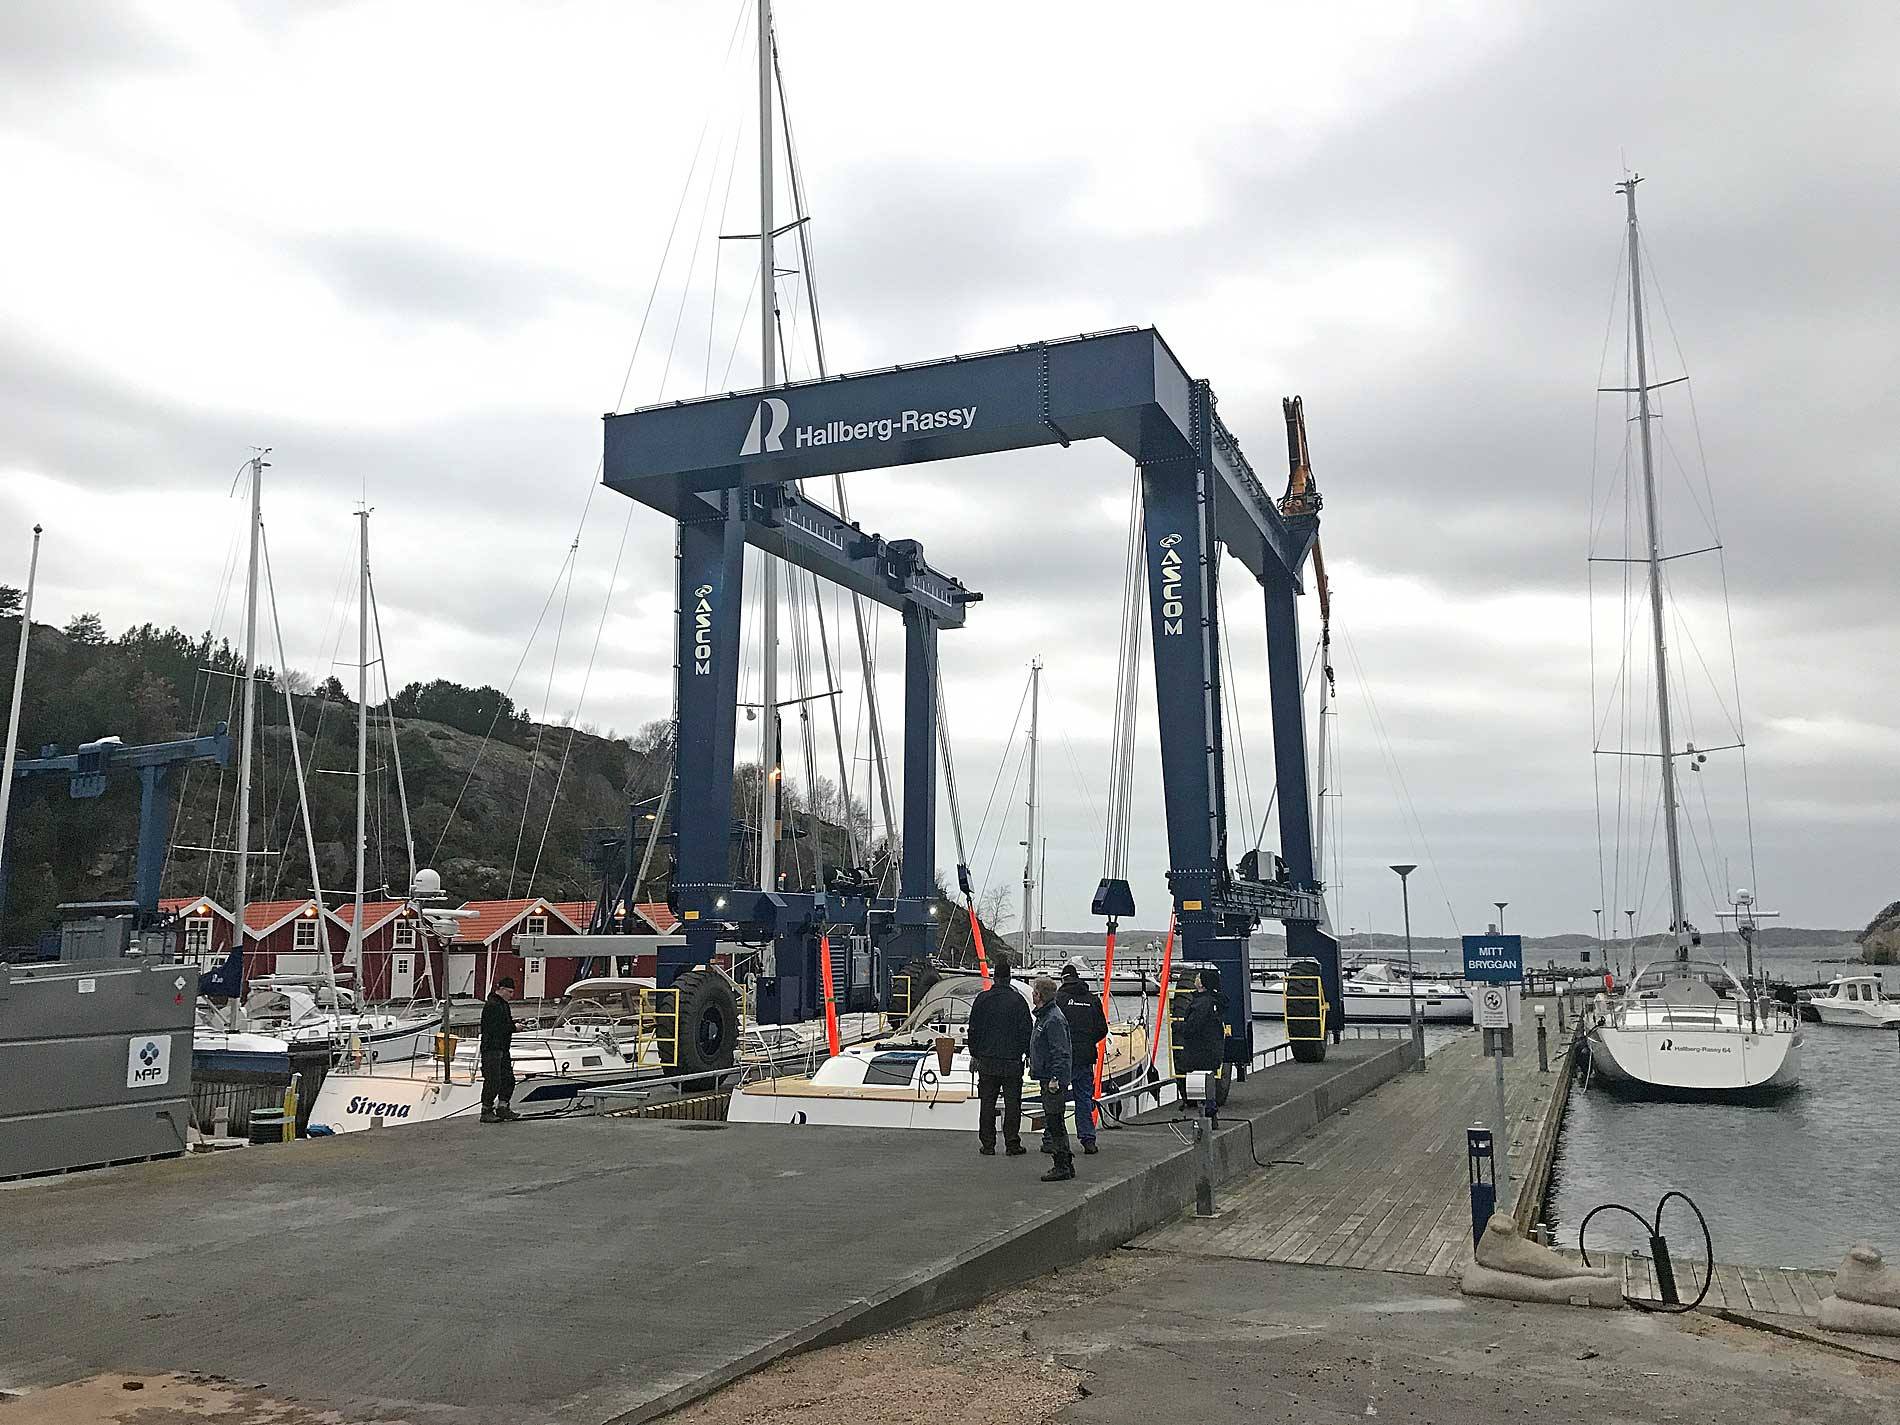 Hallberg-Rassy now has an all-new yacht crane with built-in mast crane